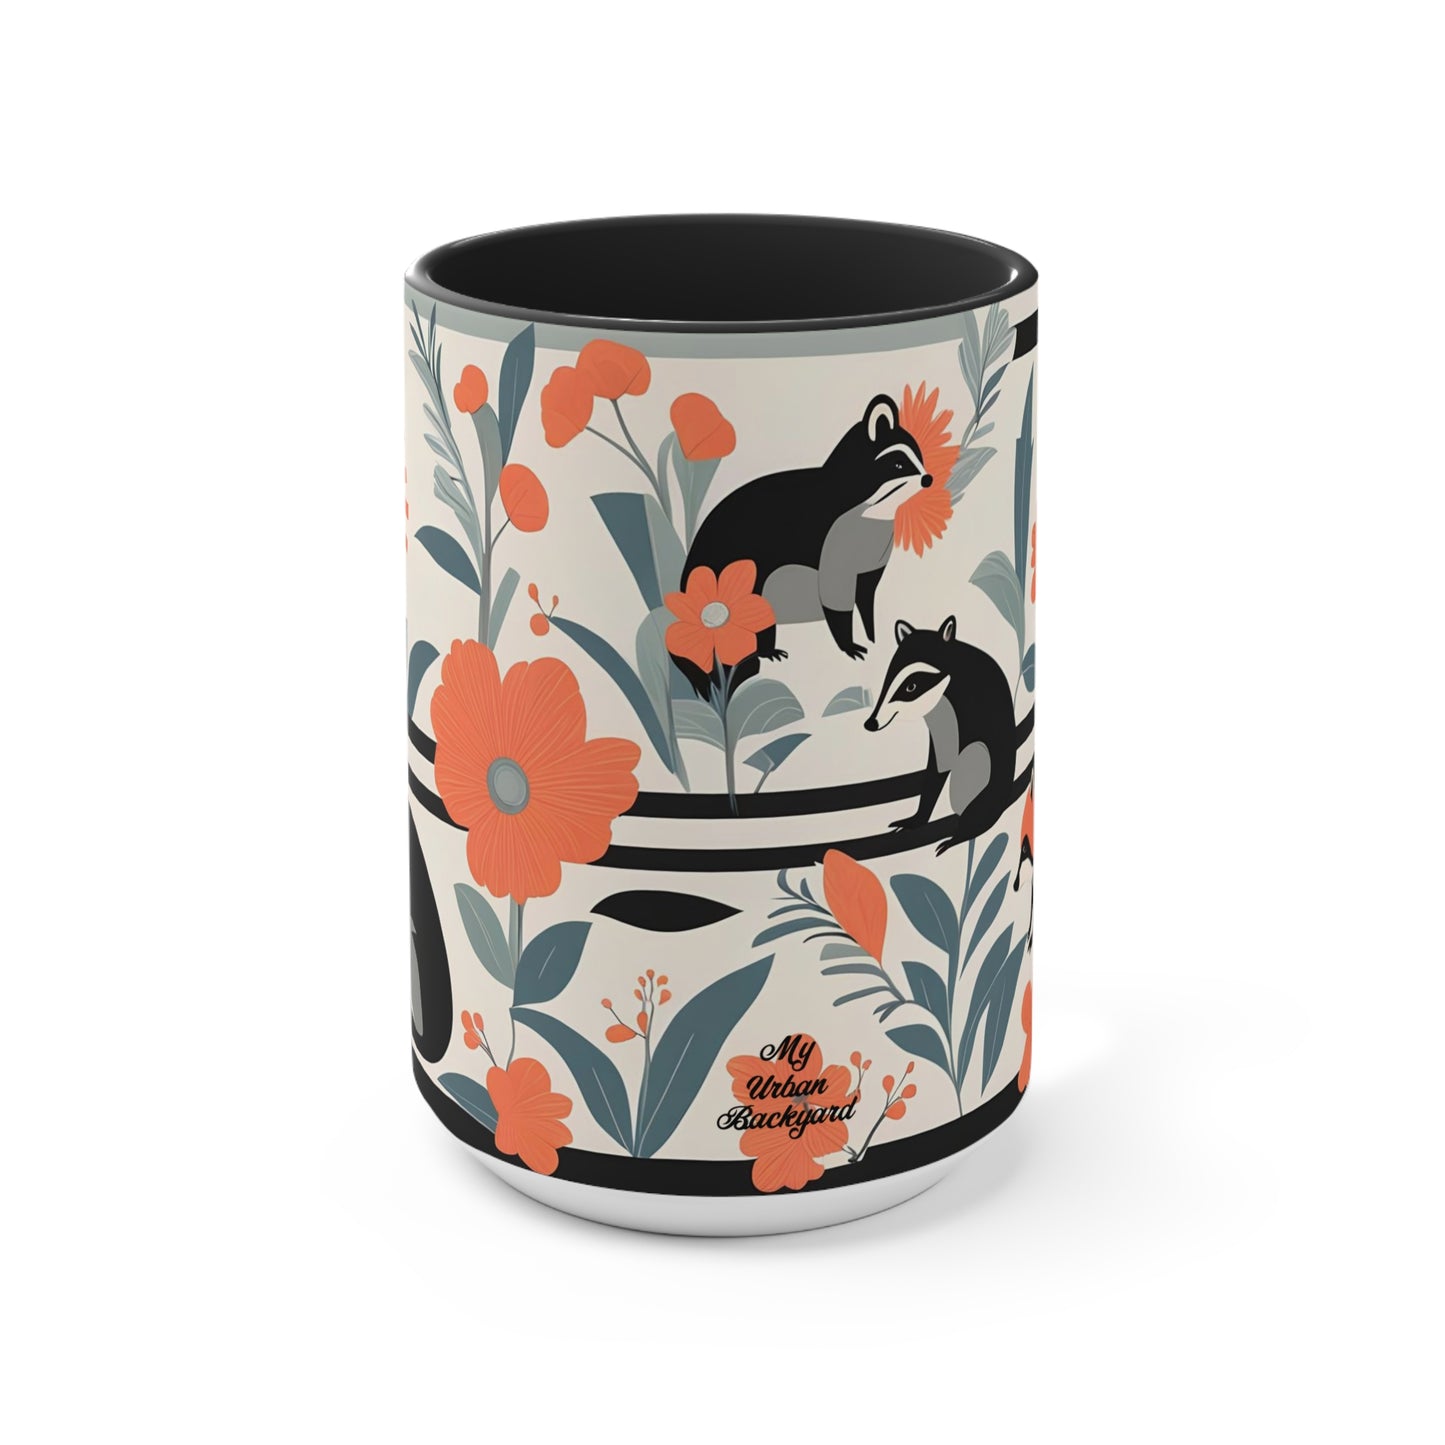 Raccoon Mural with Pastel Flowers, Ceramic Mug - Perfect for Coffee, Tea, and More!